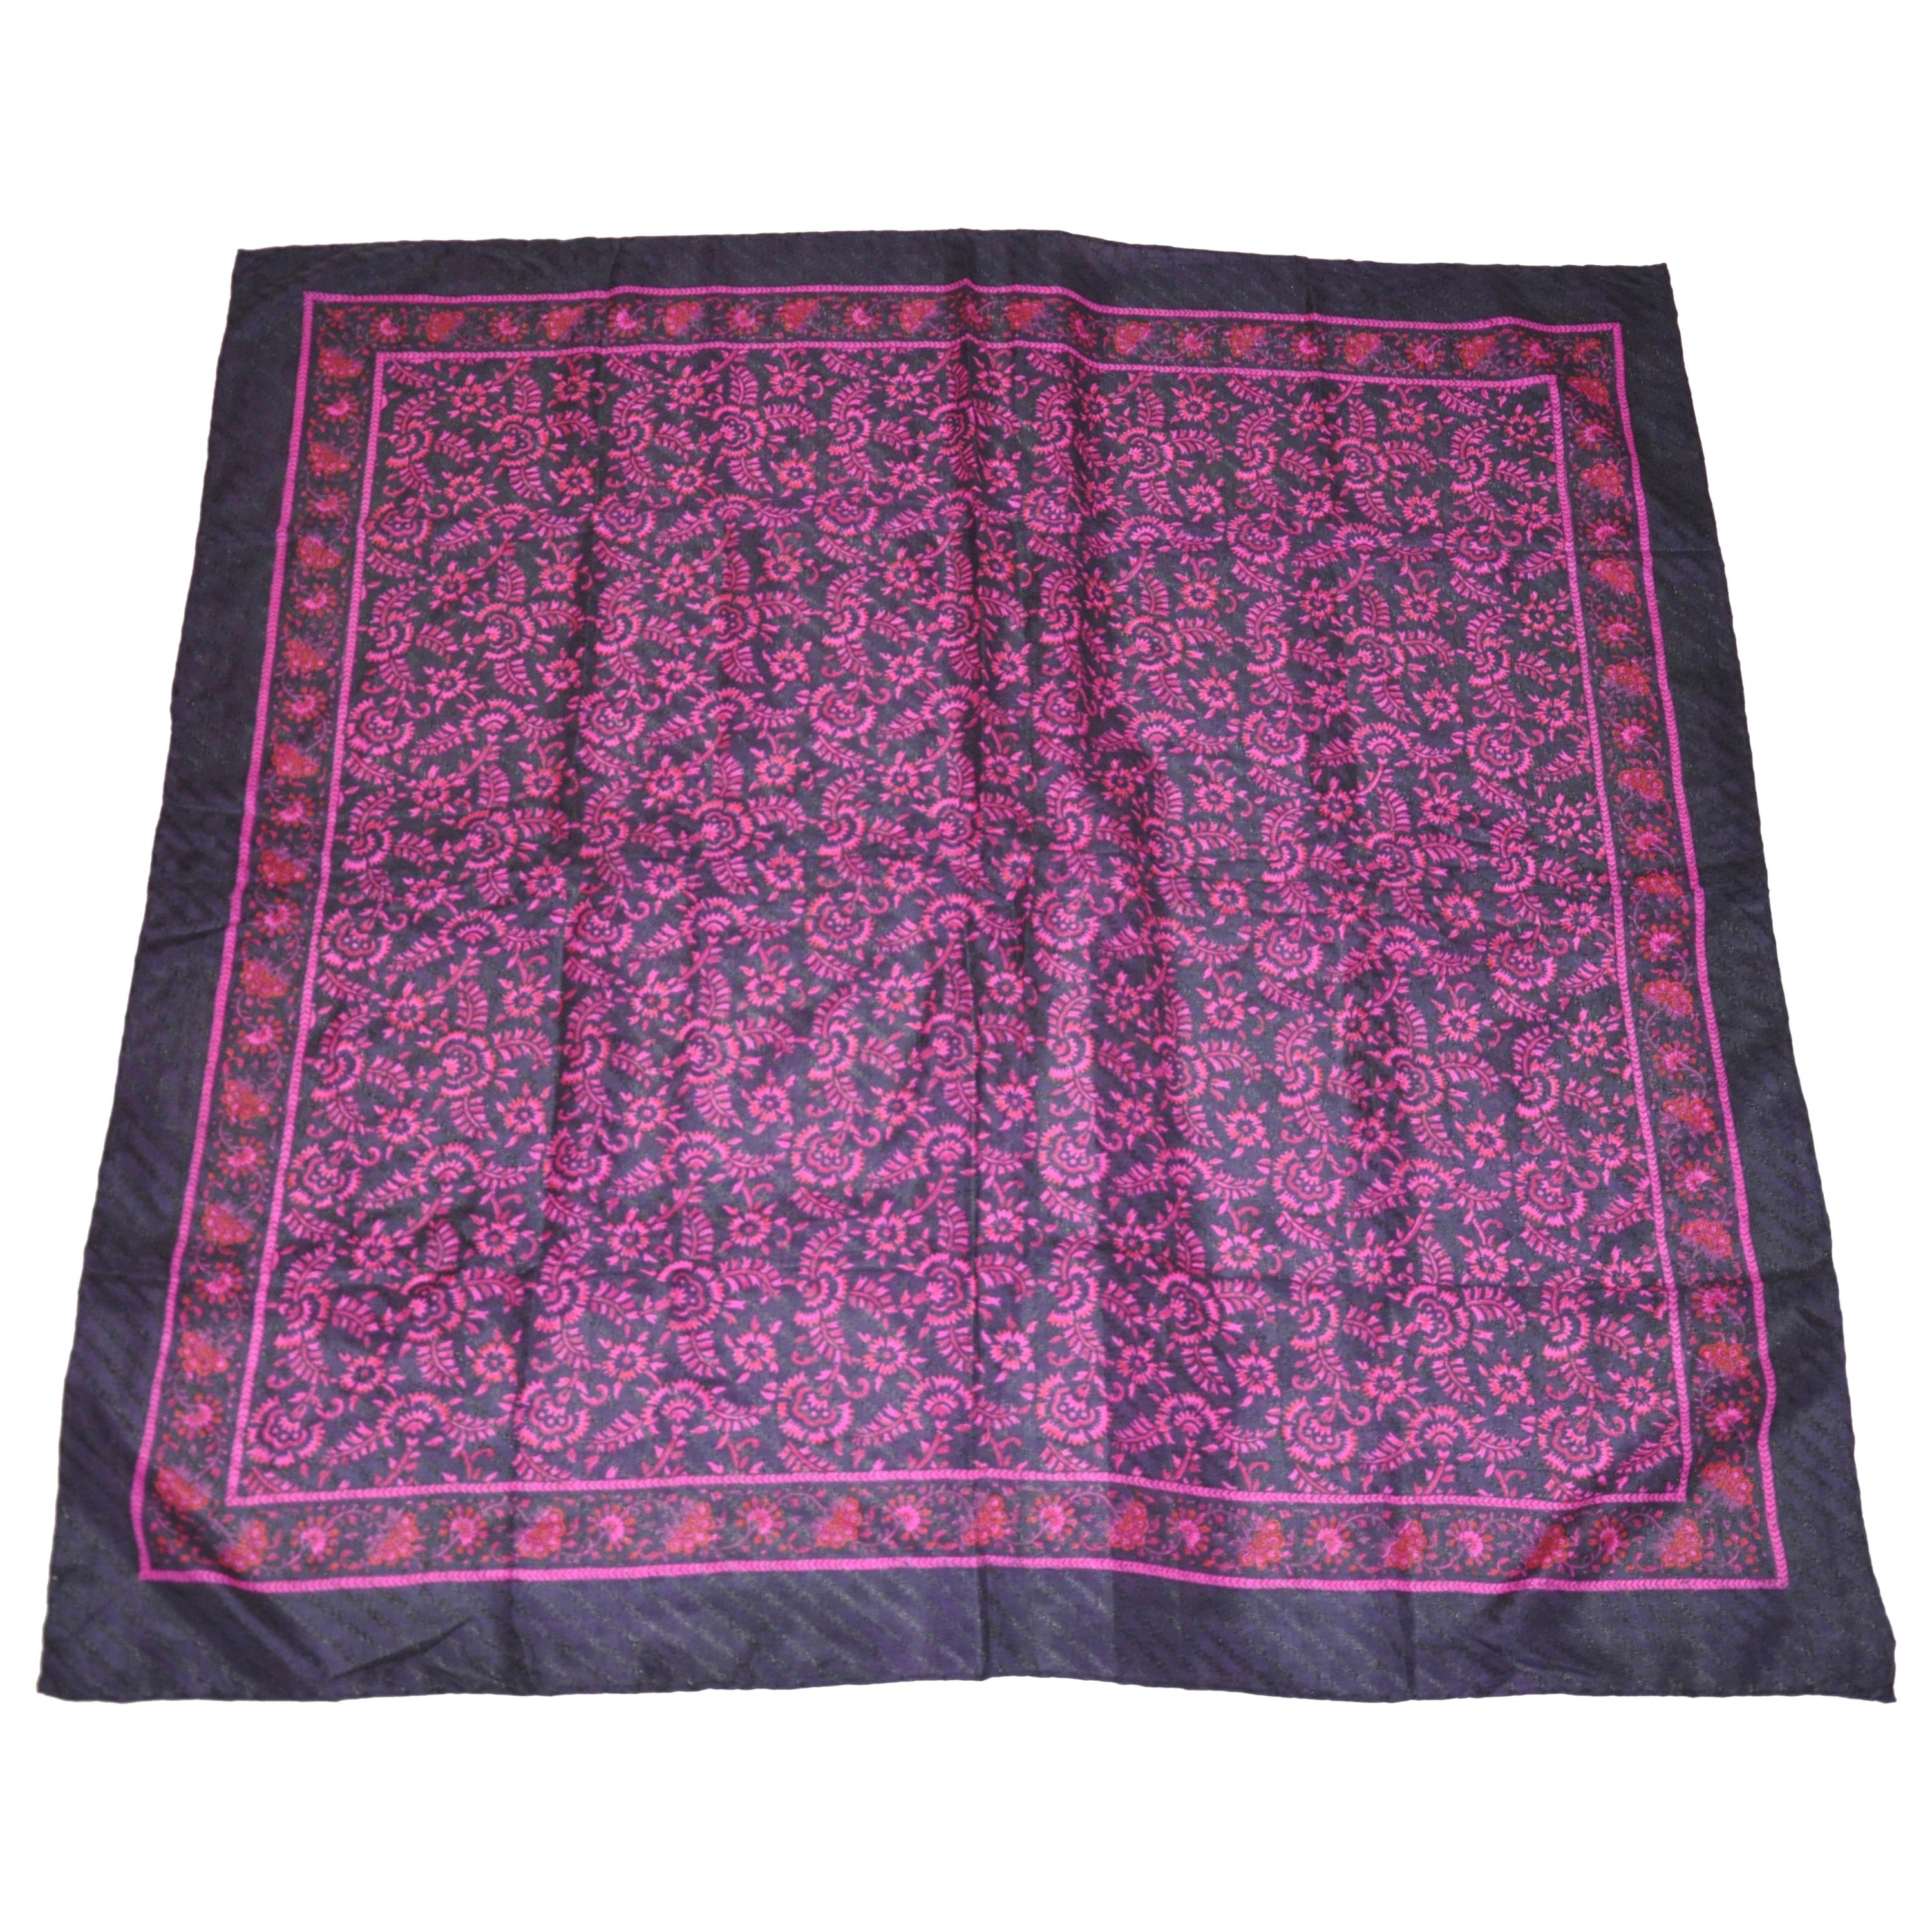 Huge Majestic "Royal Navy & Fuchsia Florals" Silk Scarf For Sale